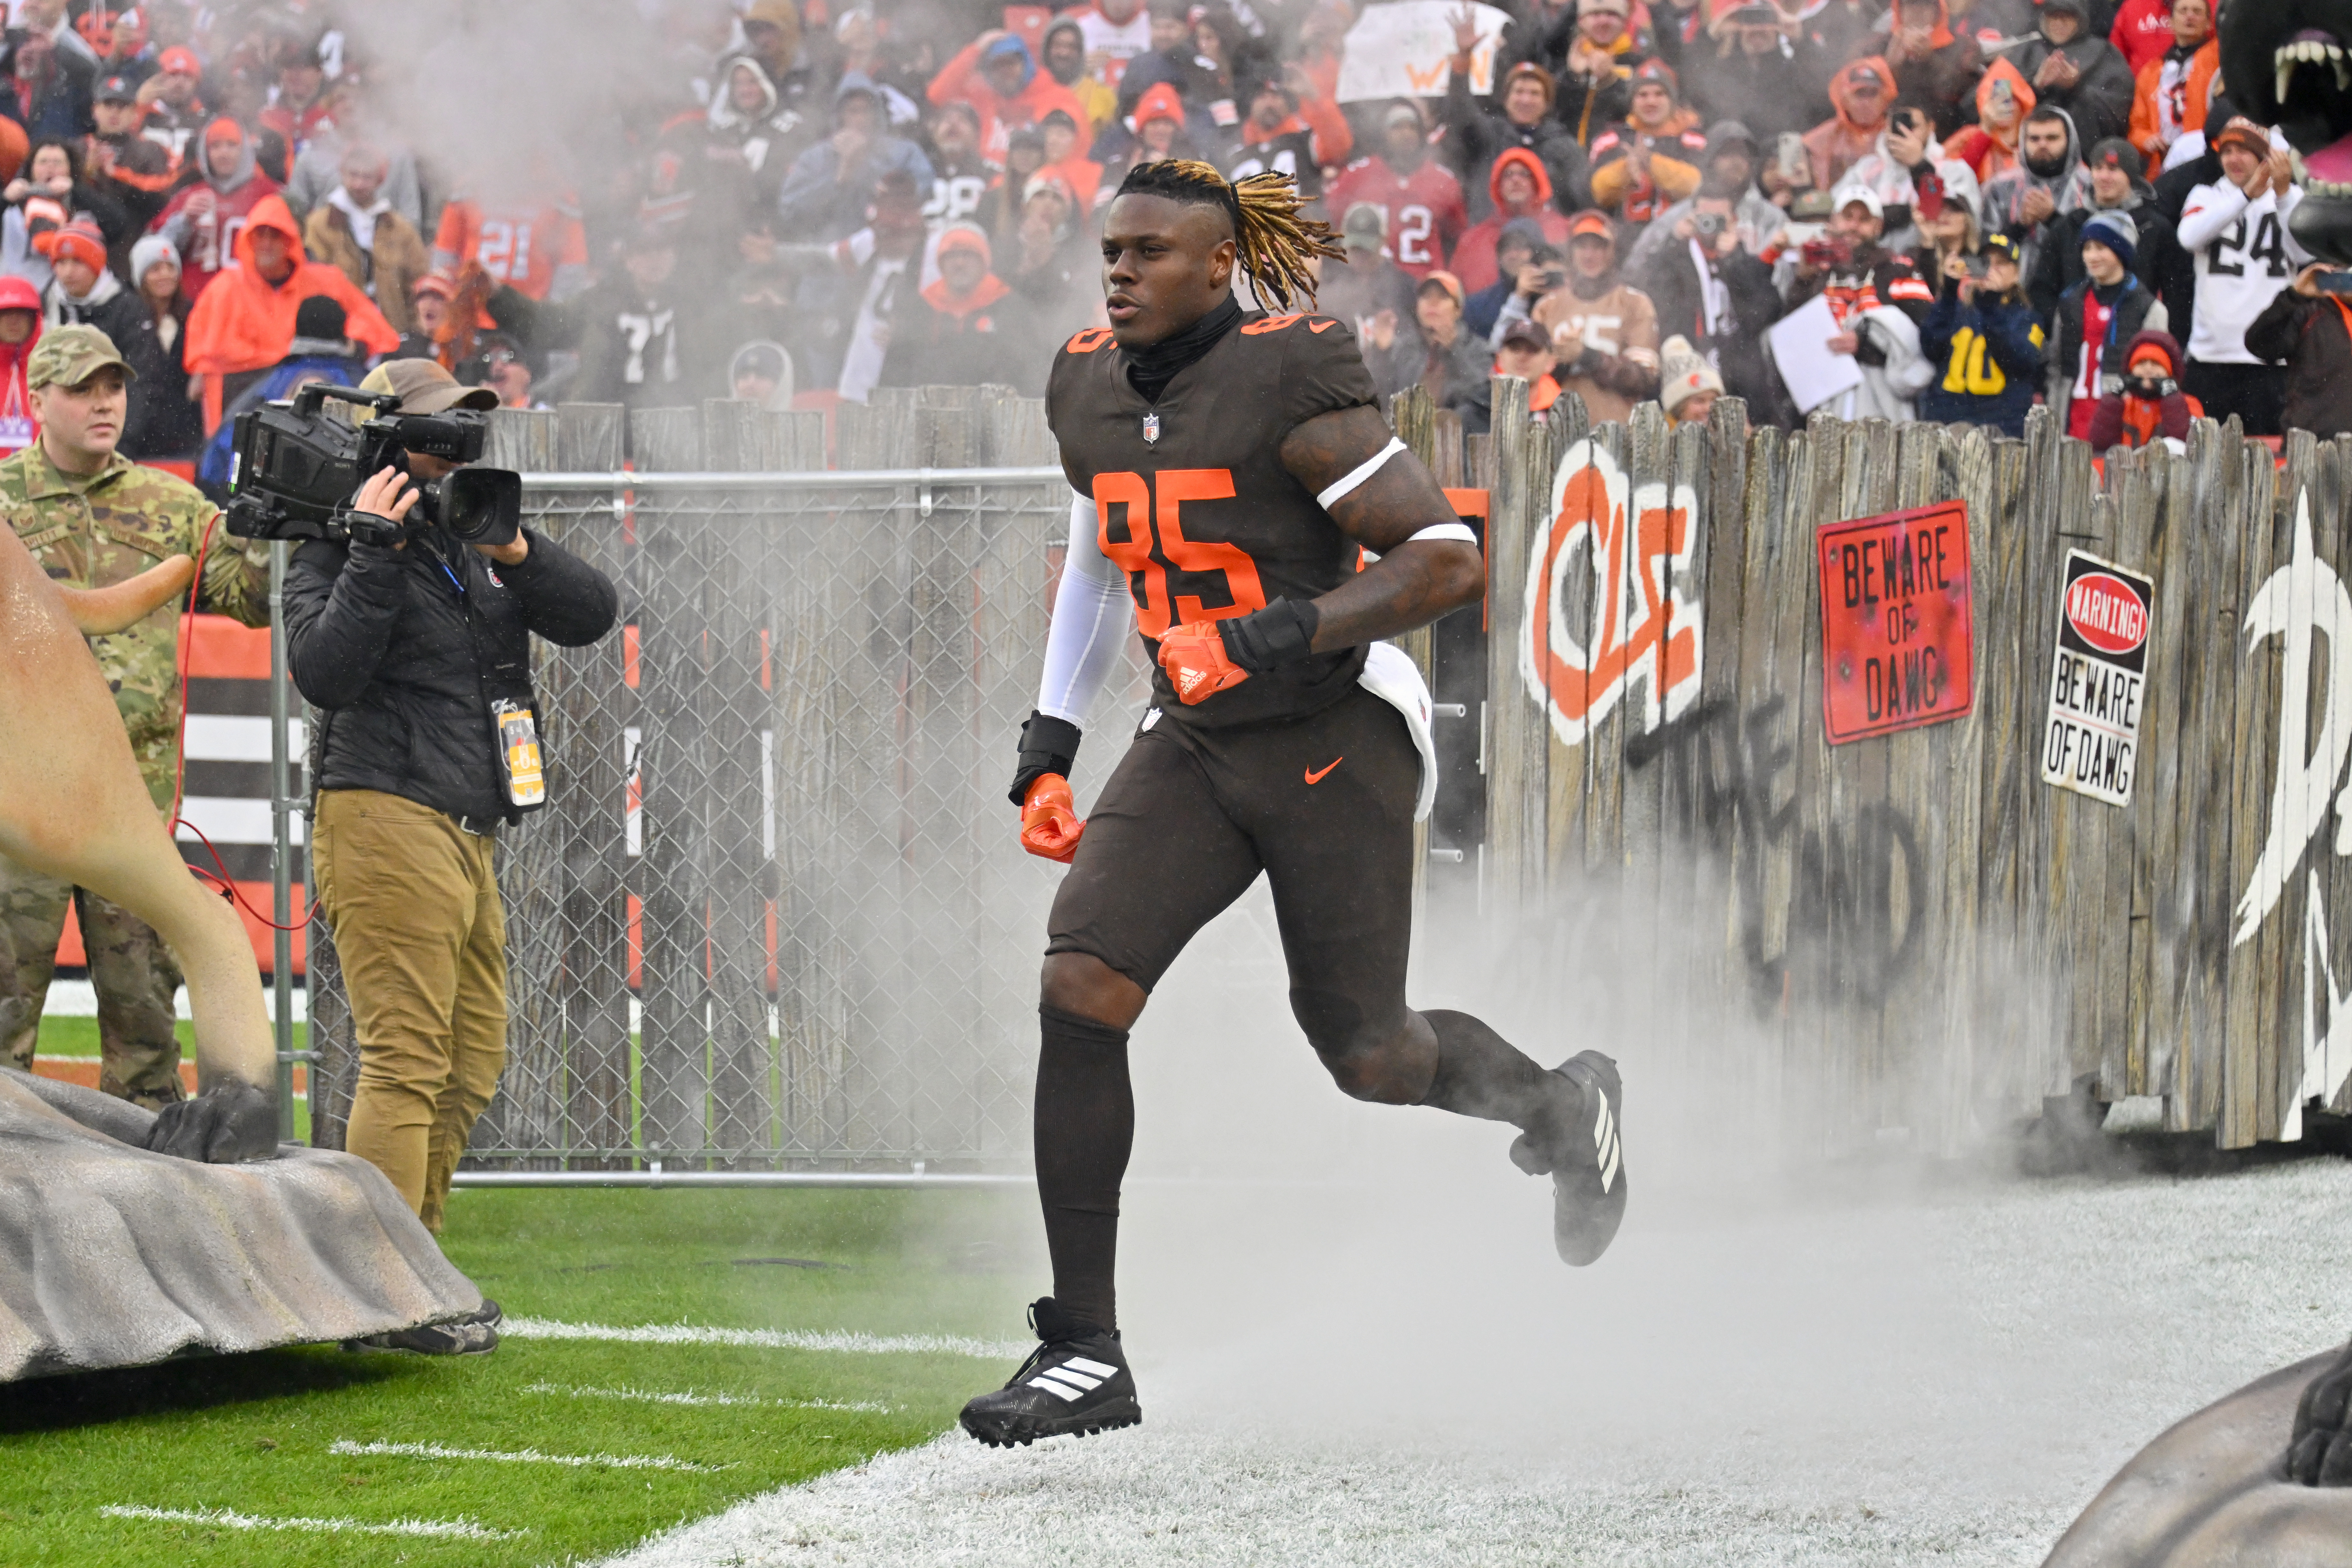 Tight end David Njoku #85 of the Cleveland Browns runs onto the field during player introductions prior to the game against the Tampa Bay Buccaneers at FirstEnergy Stadium on November 27, 2022 in Cleveland, Ohio.